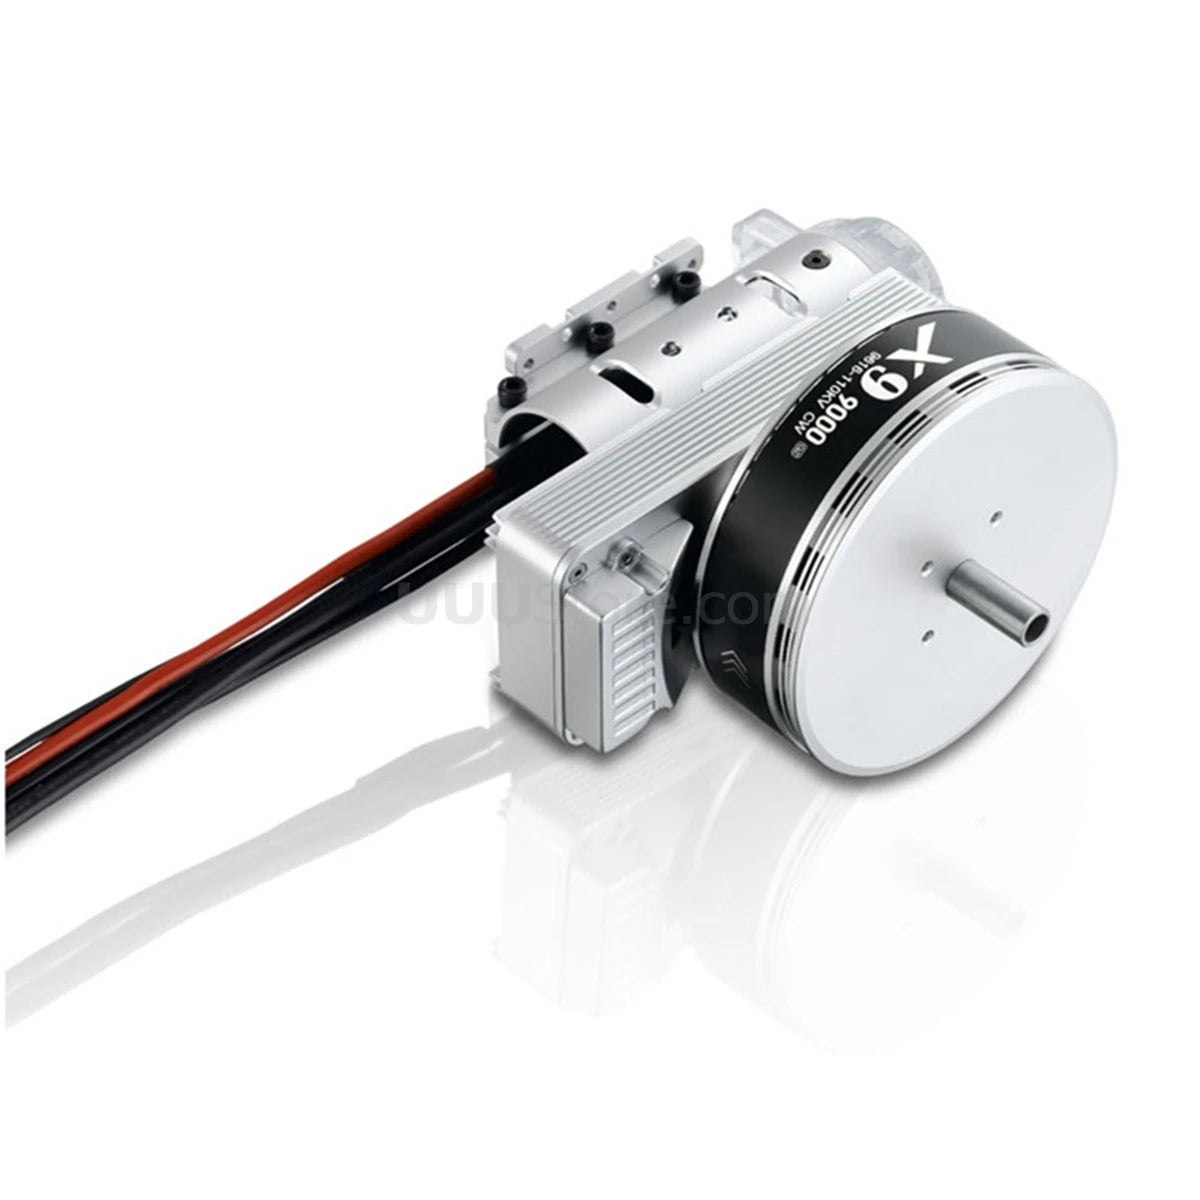 Hobbywing X9 Power System, motor boasts a large stator size (96x16mm), a KV